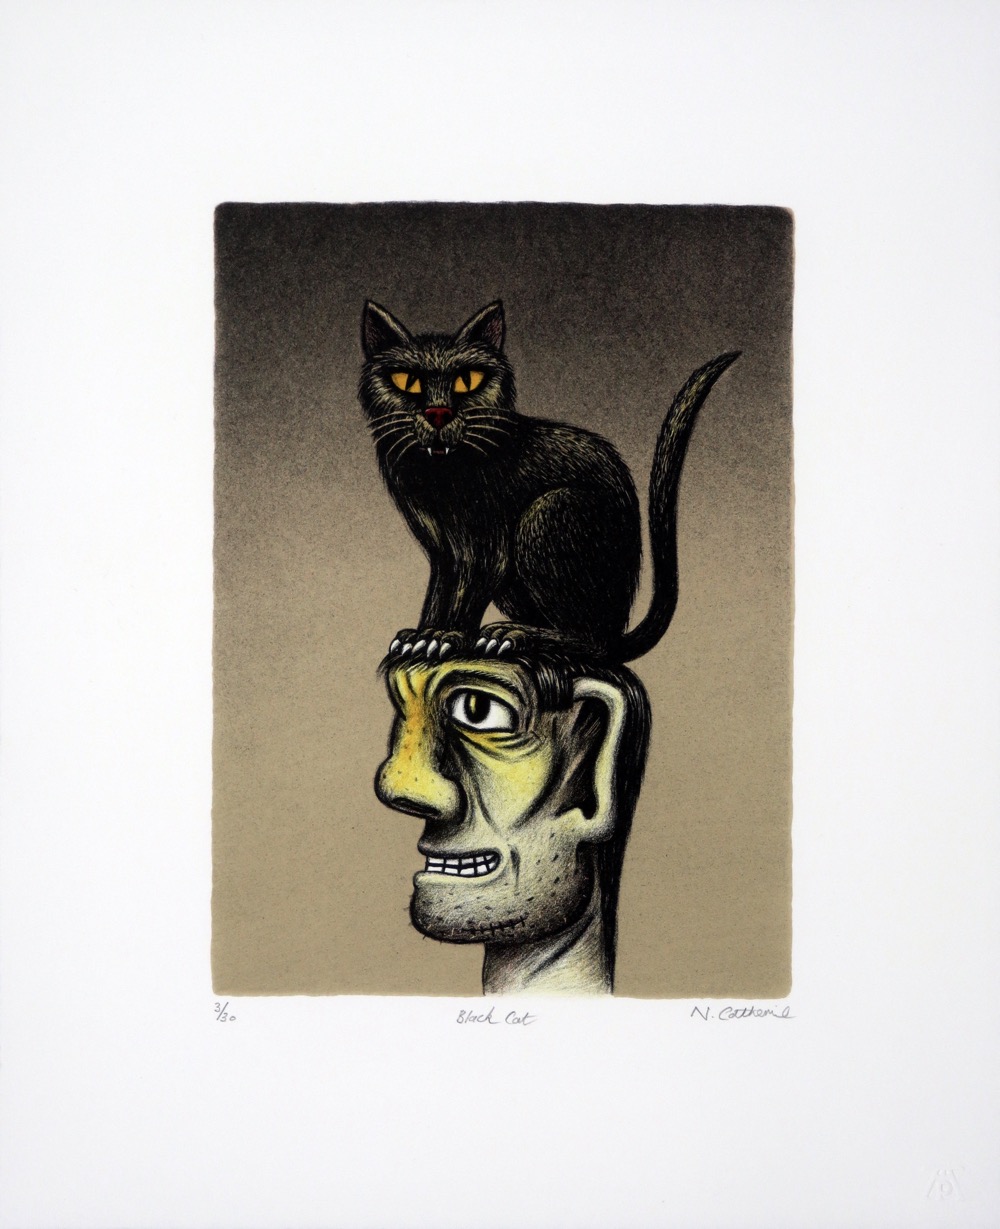 Man's head with scared face in profile with a black cat sitting on his head